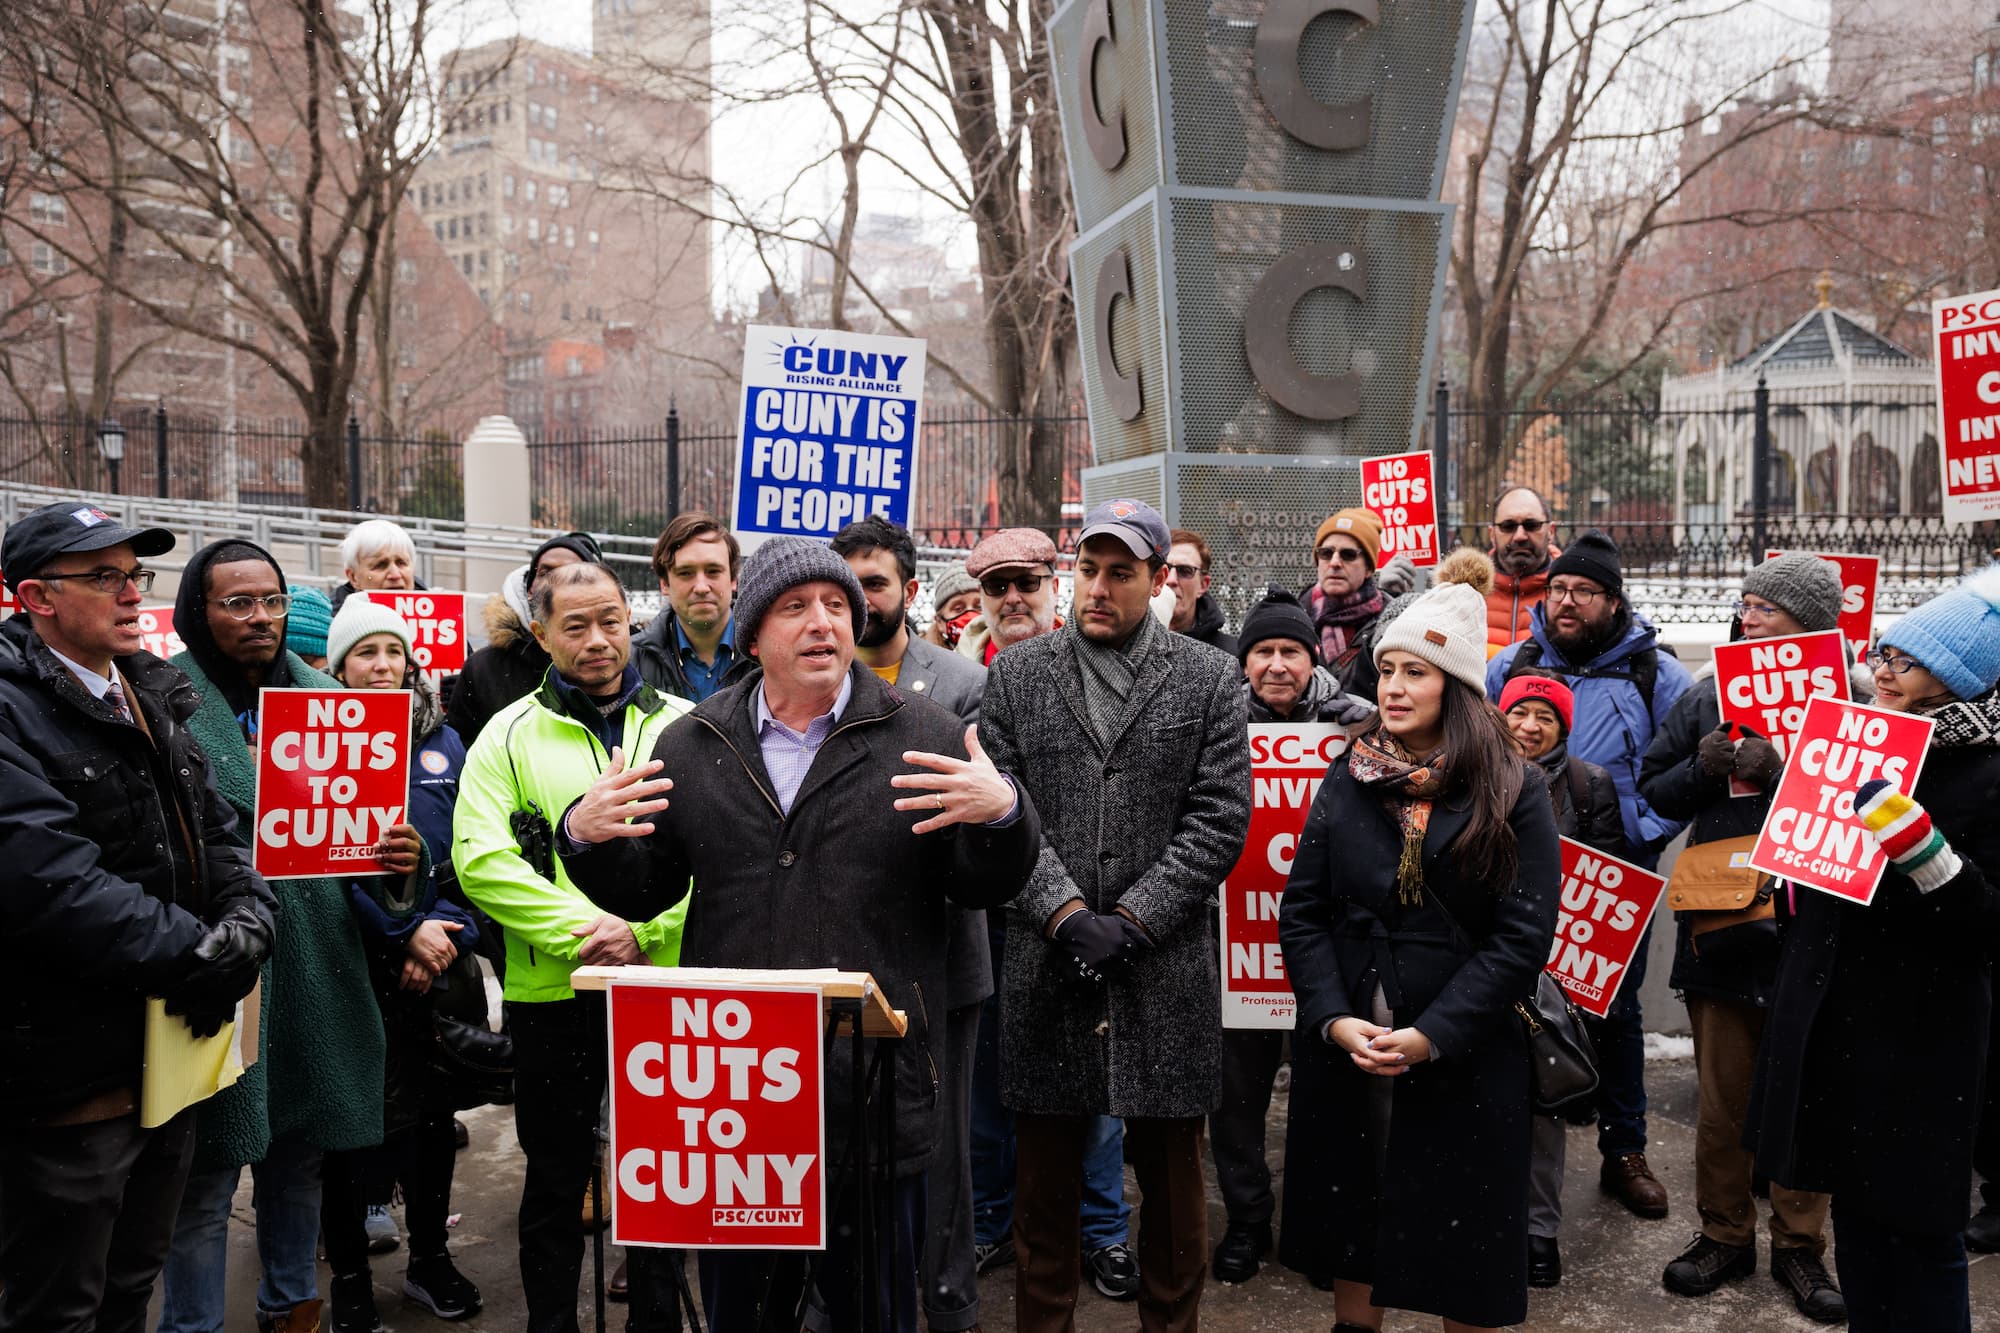 Dozens of CUNY staff & student activists joined elected officials outside the BMCC calling for increased funding for the university and demanding restoration of cut jobs & student services.